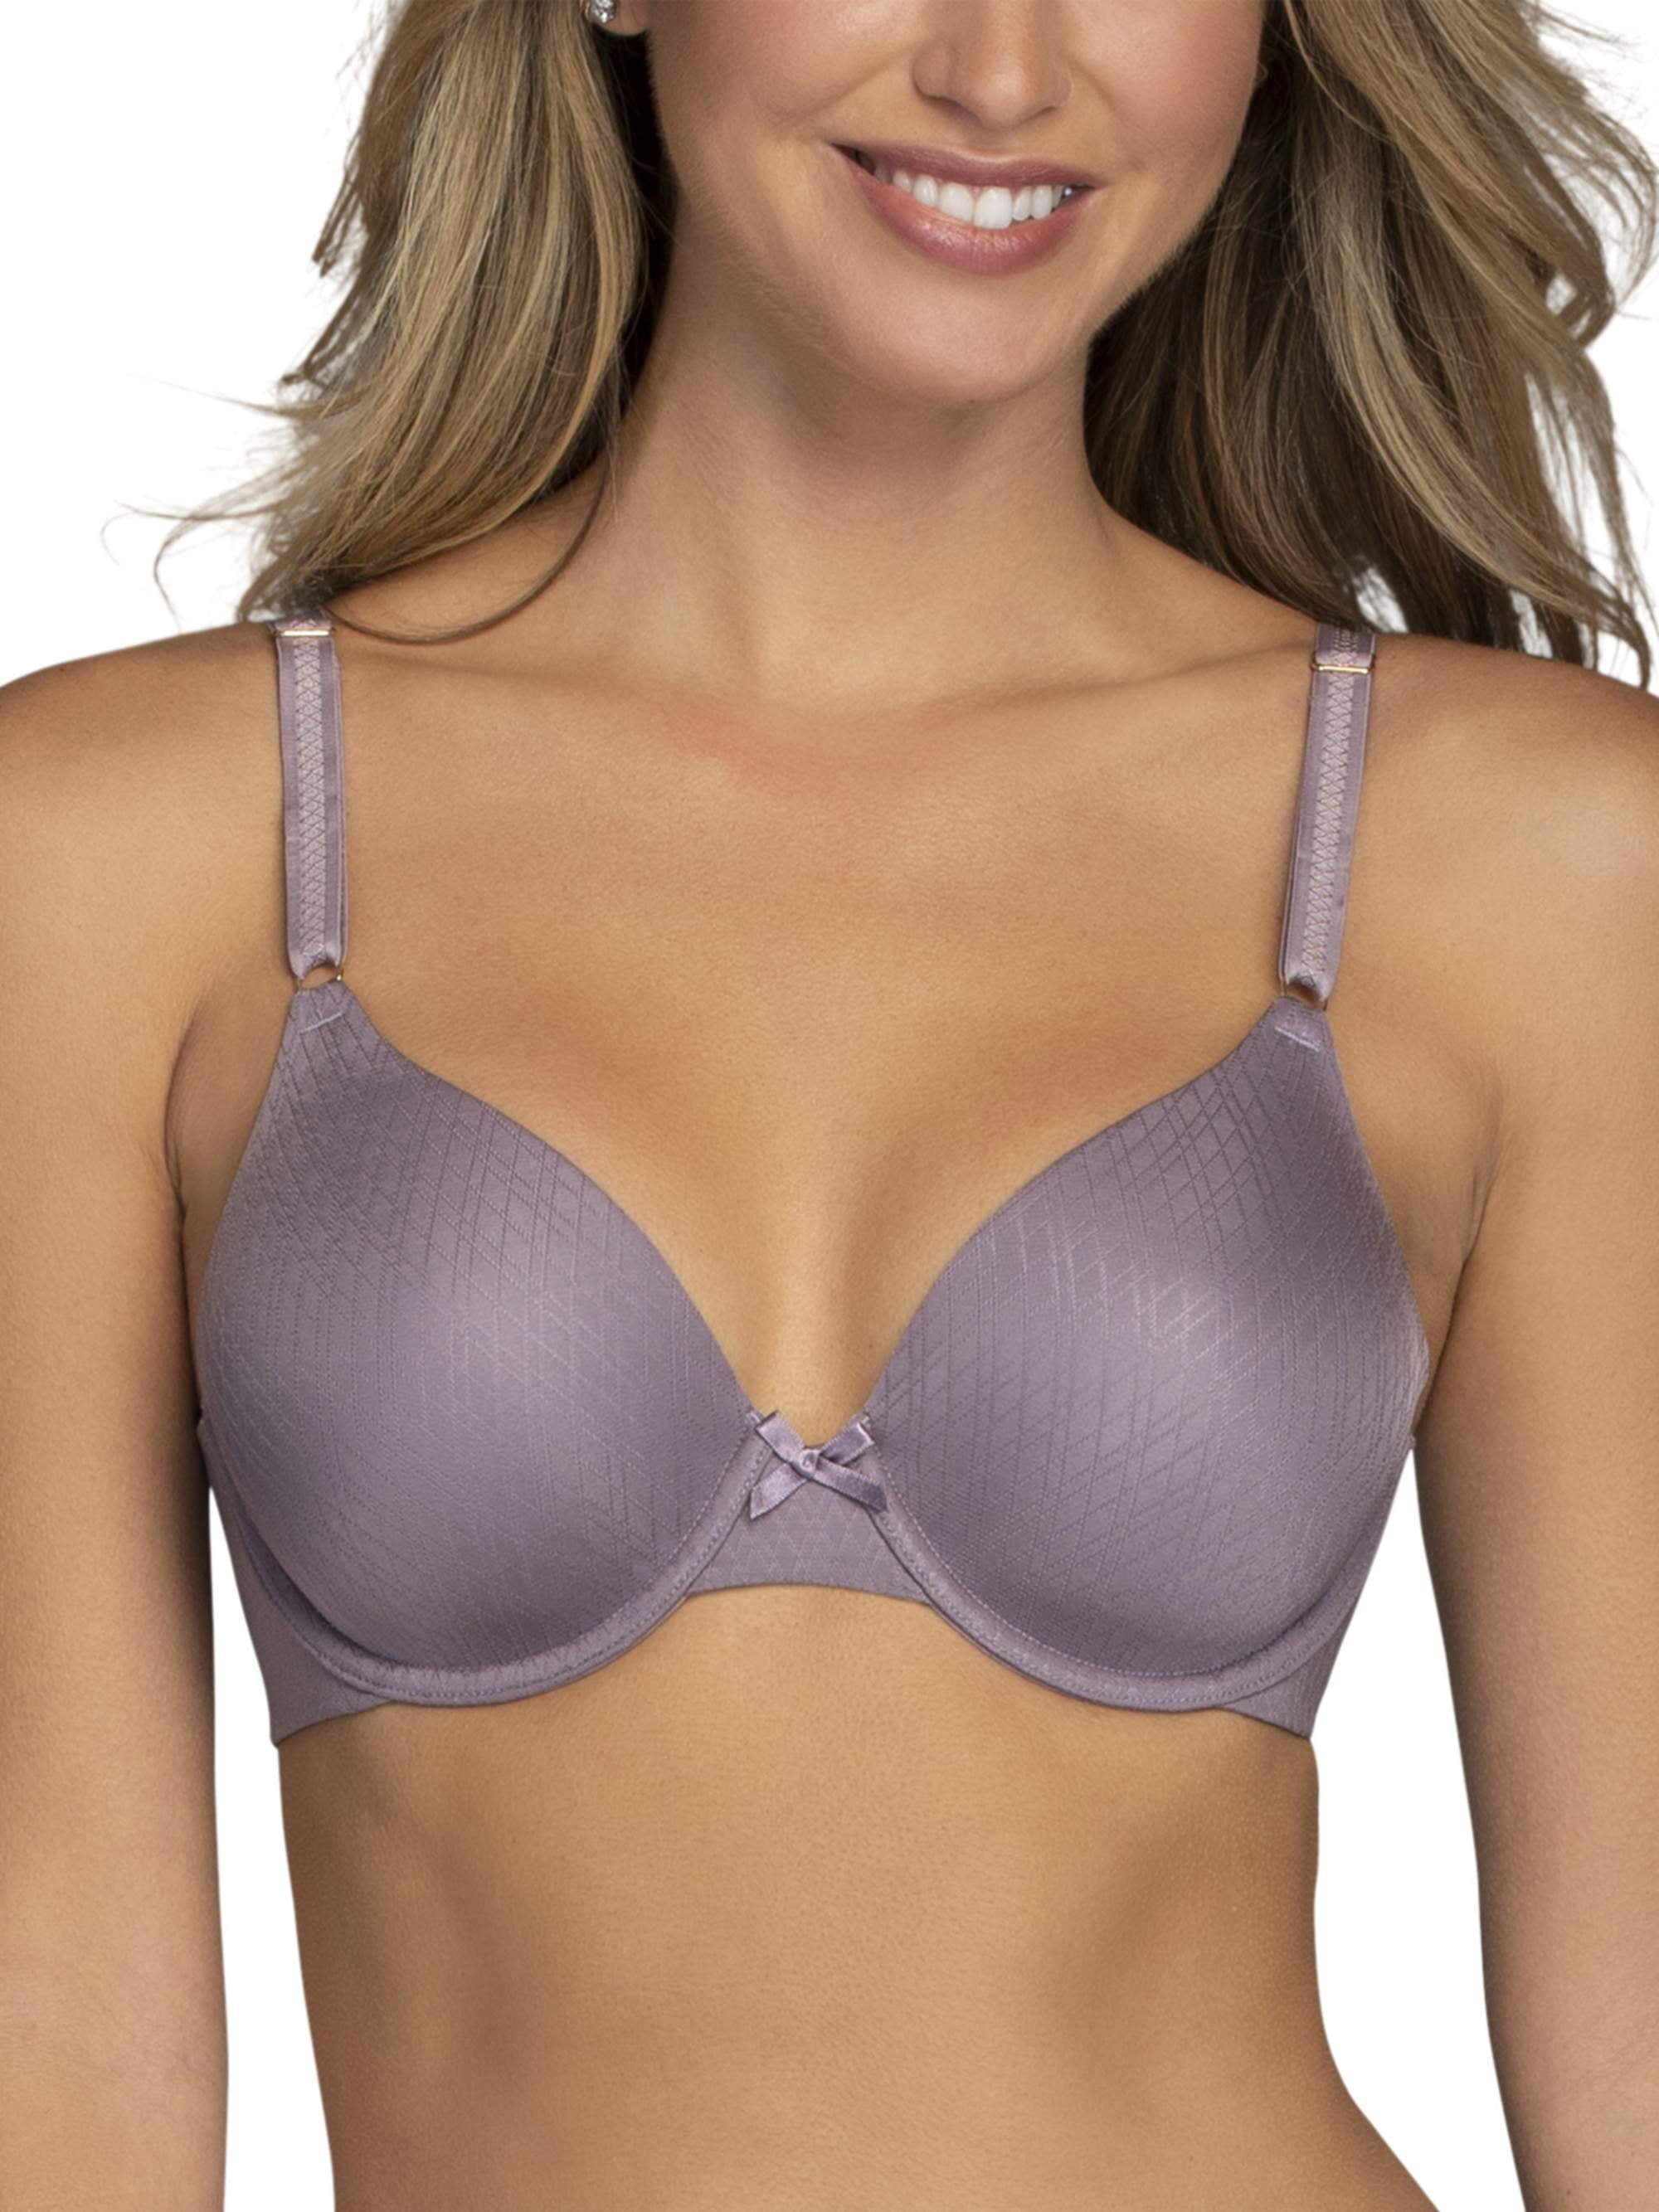 30,000+ Shoppers Have Given This Comfy Bra a Perfect Rating—and It's 48% Off